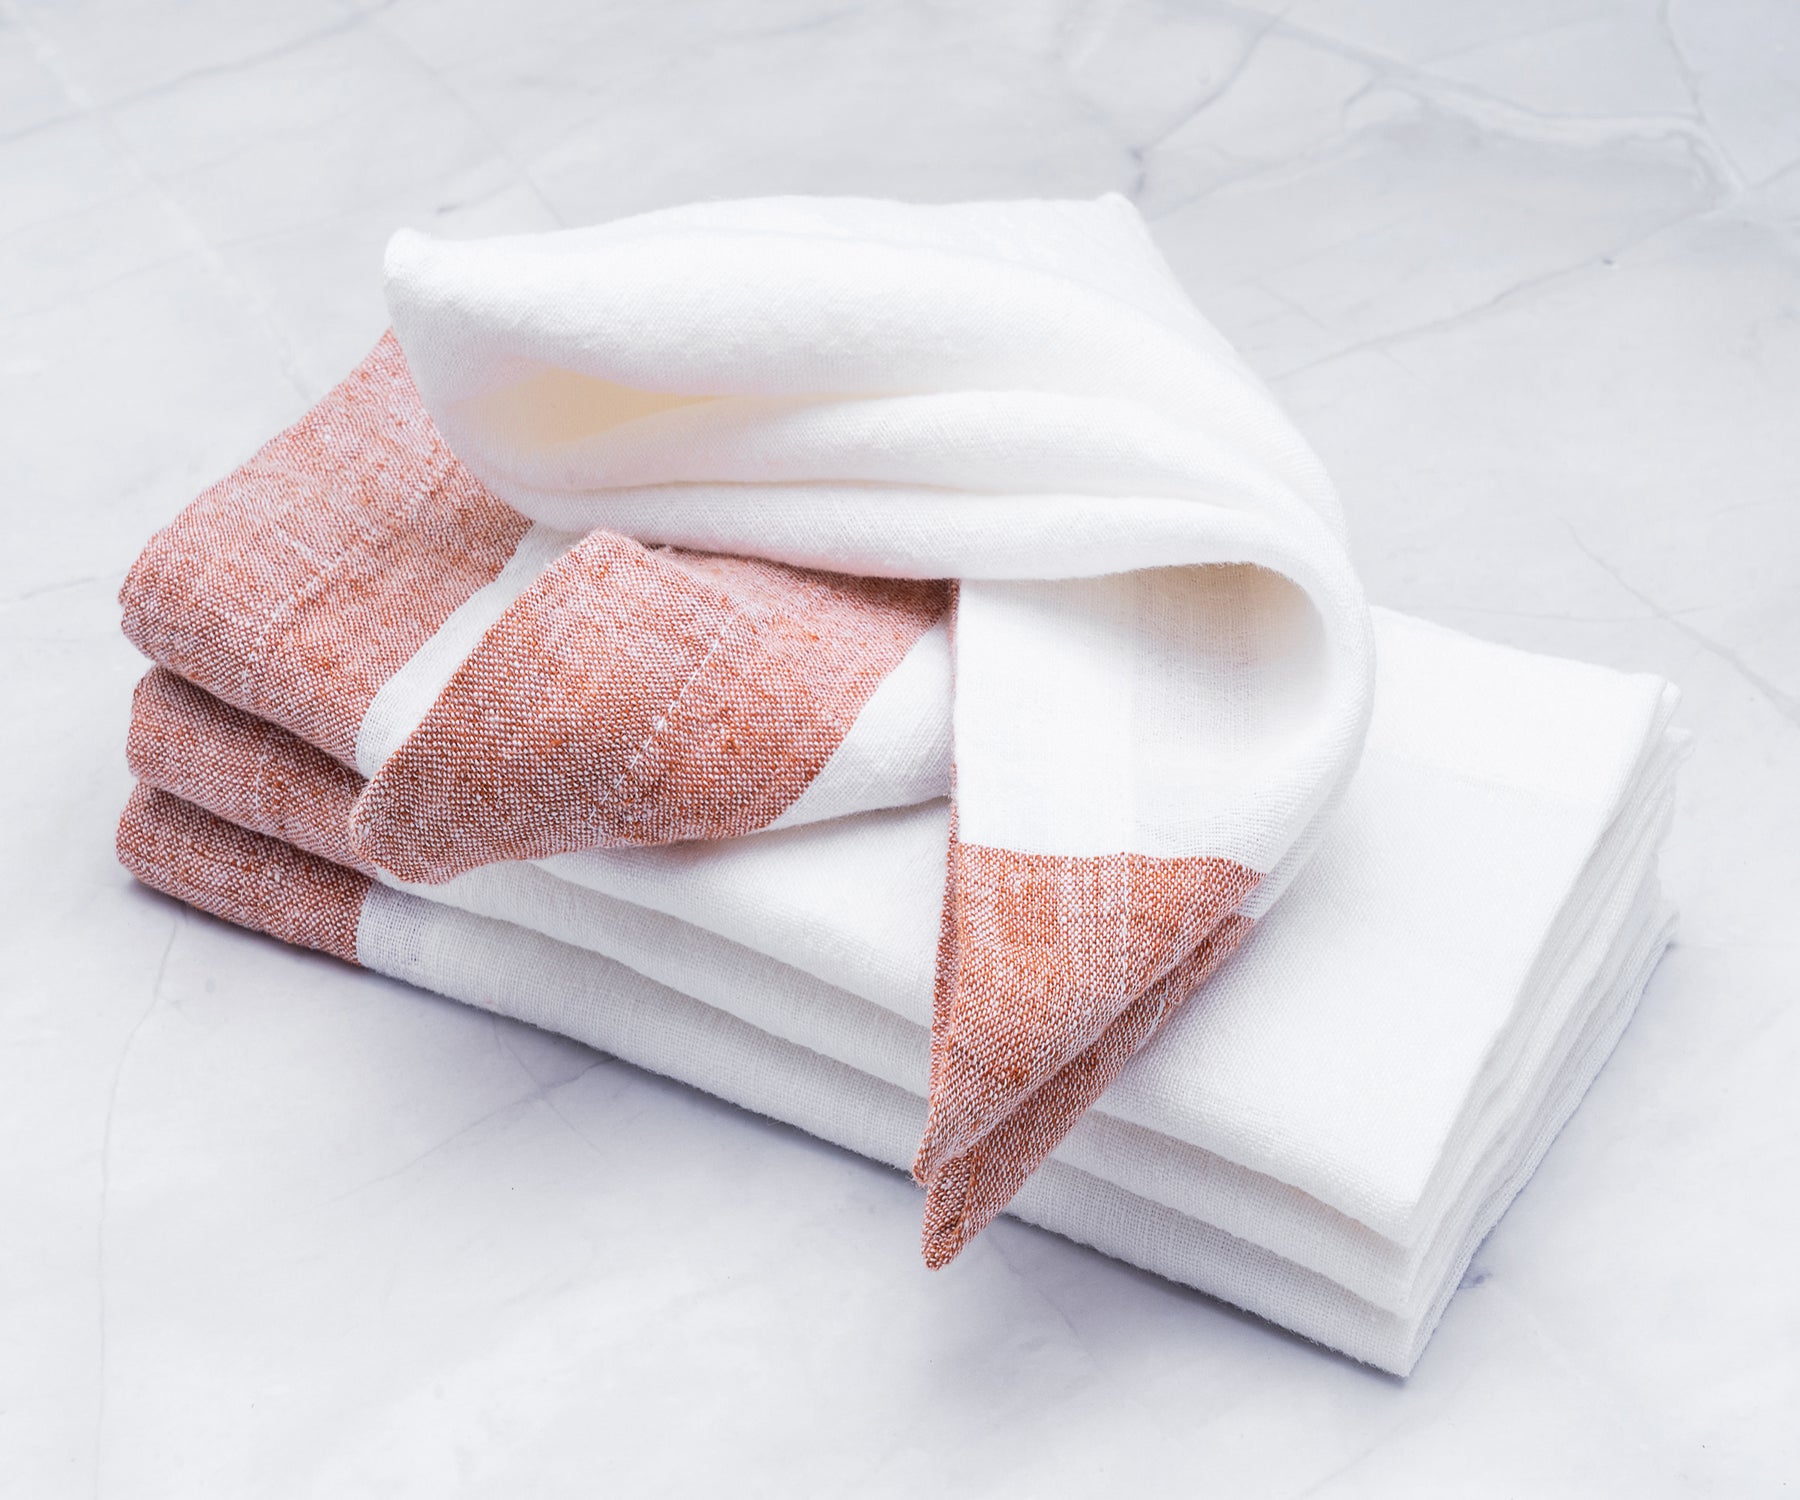 Set your table with exquisite linen table napkins, adding refinement and charm to any meal.